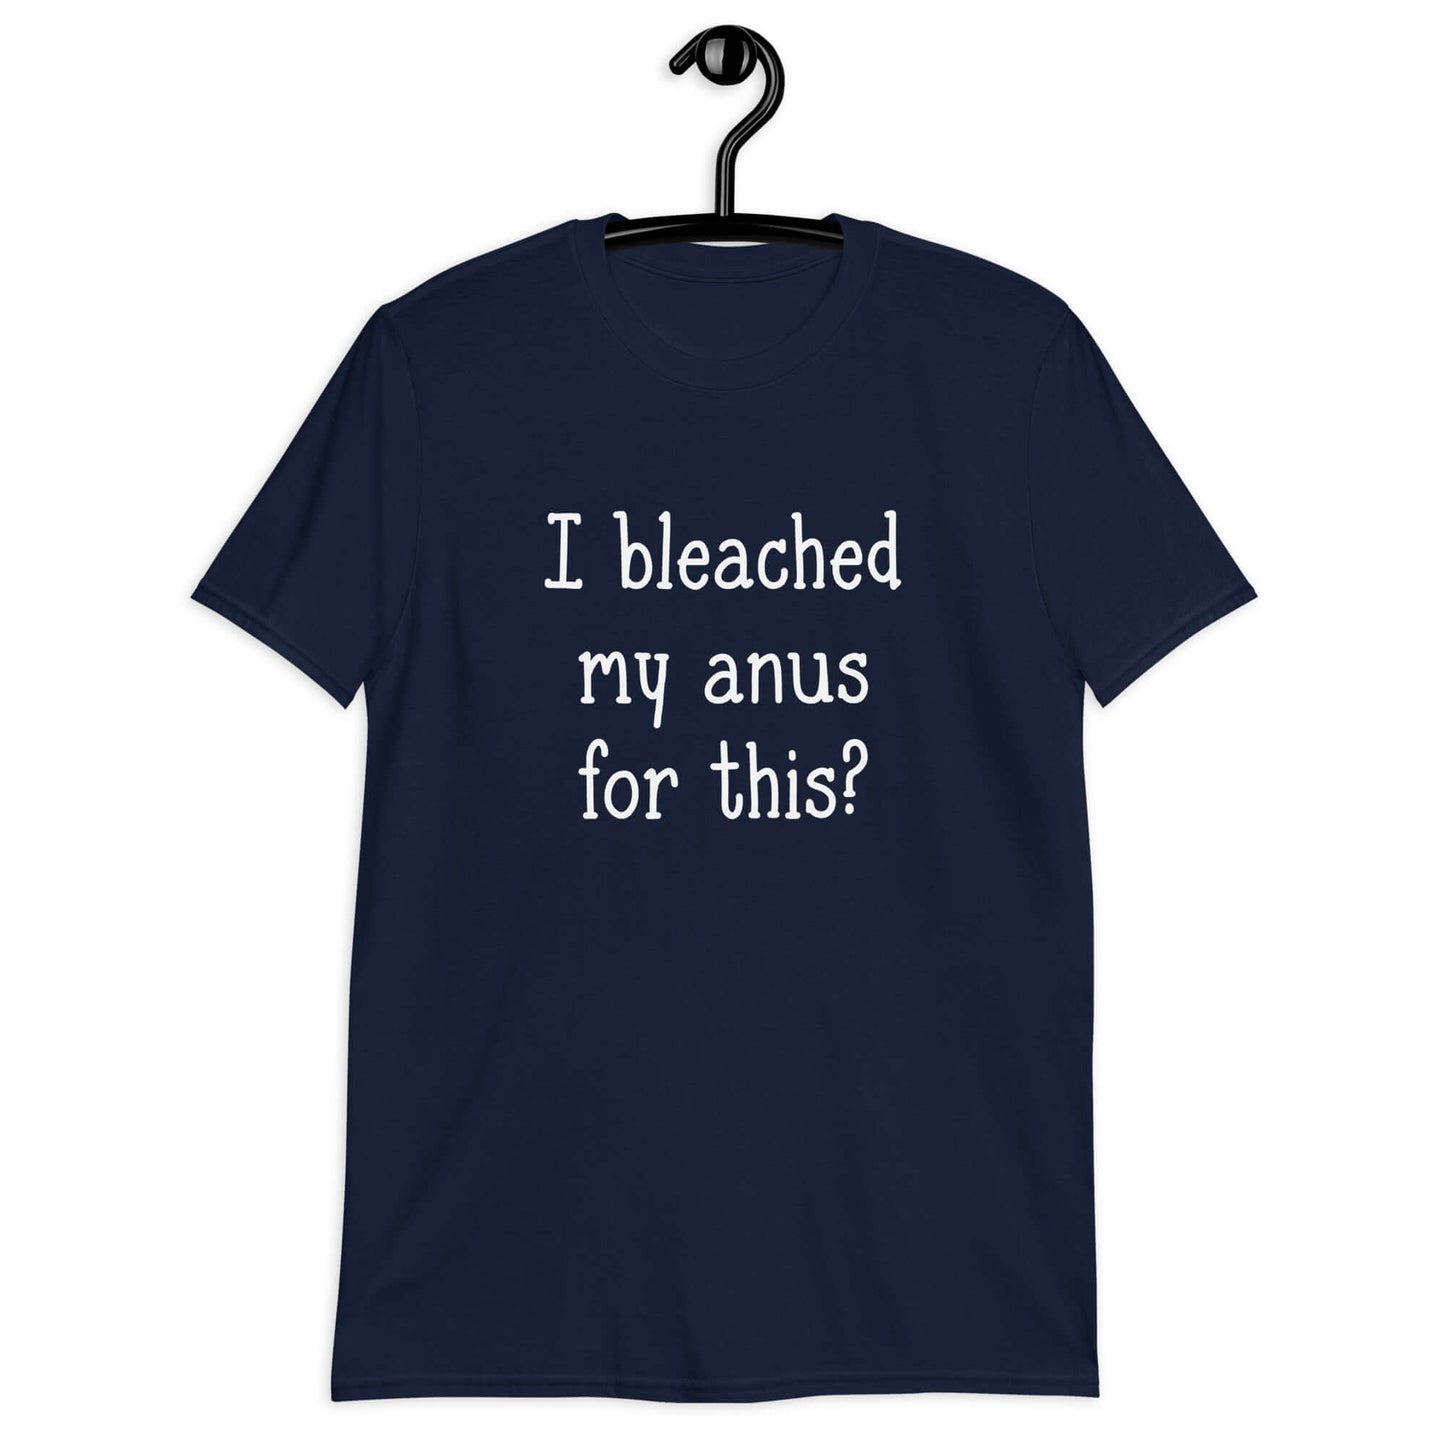 Navy blue t-shirt with the words I bleached my anus for this printed on the front.